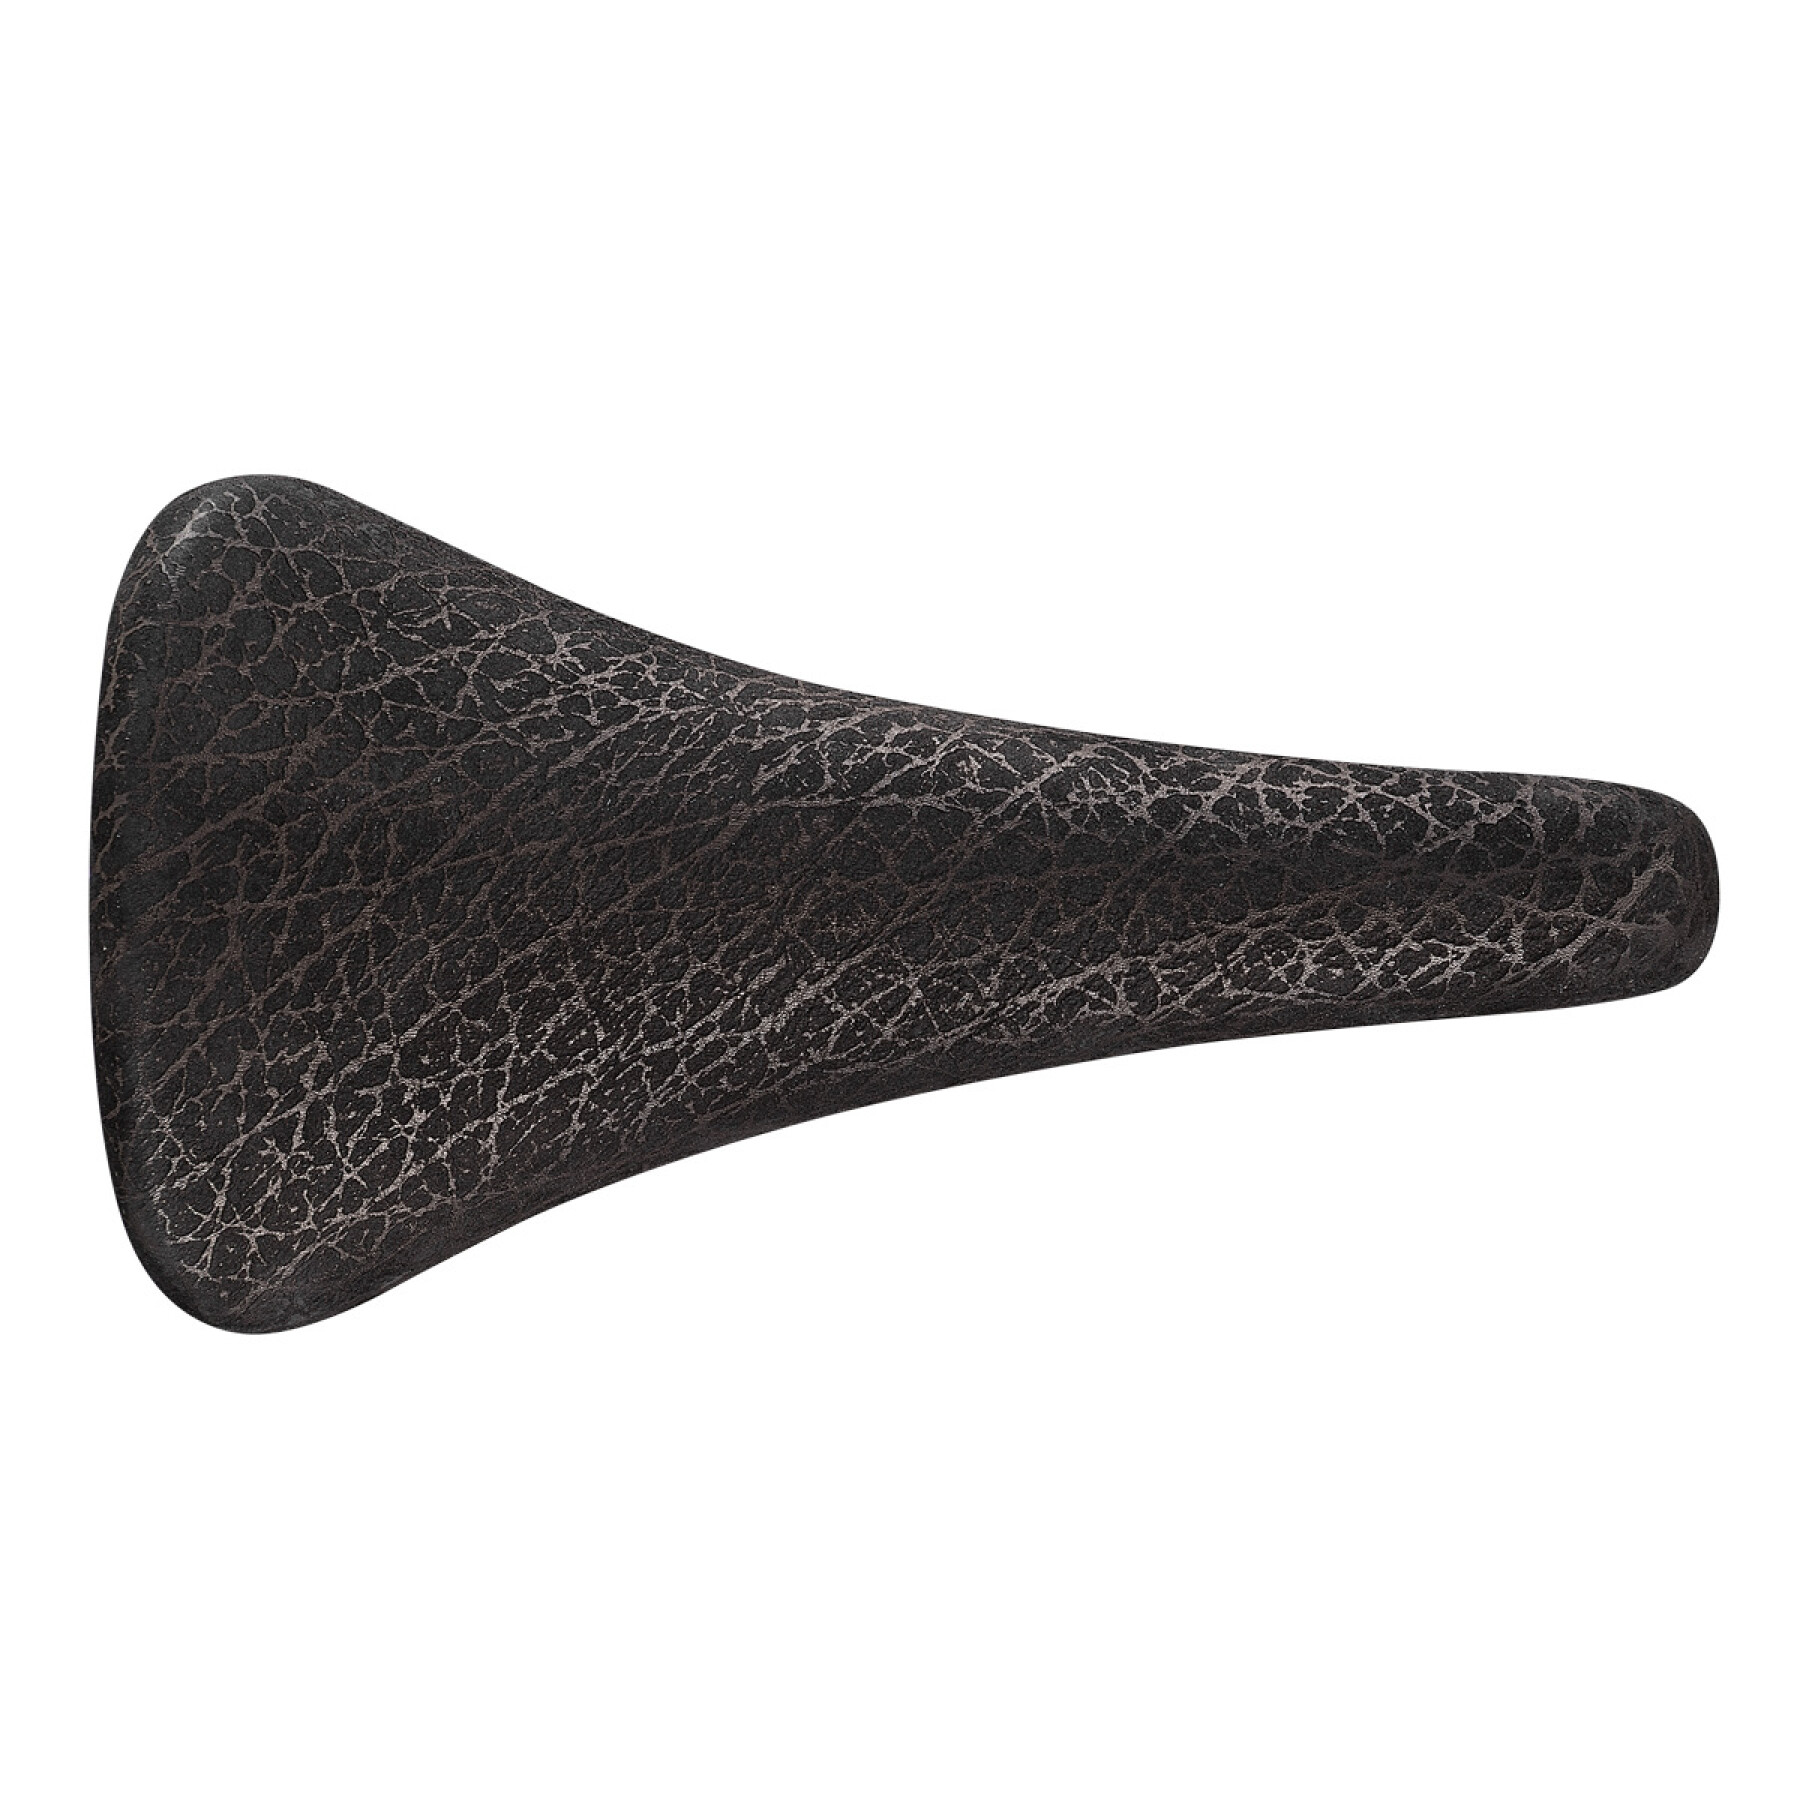 Selle Selle San Marco Concor SC Full-Fit LE Rino